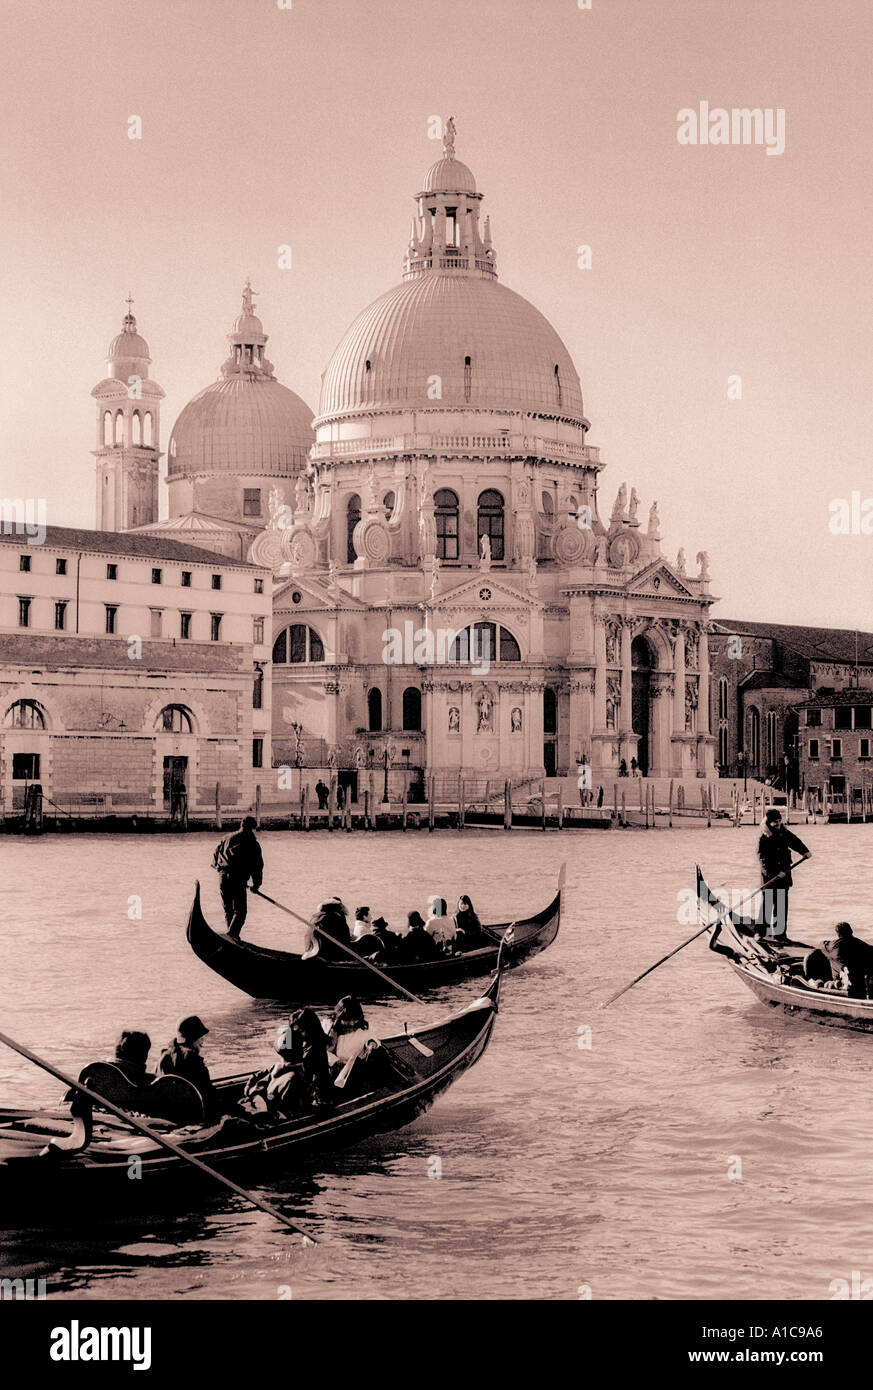 Gondolas on the Grand Canal Venice with the Church of the Salute in the background toned black white Stock Photo